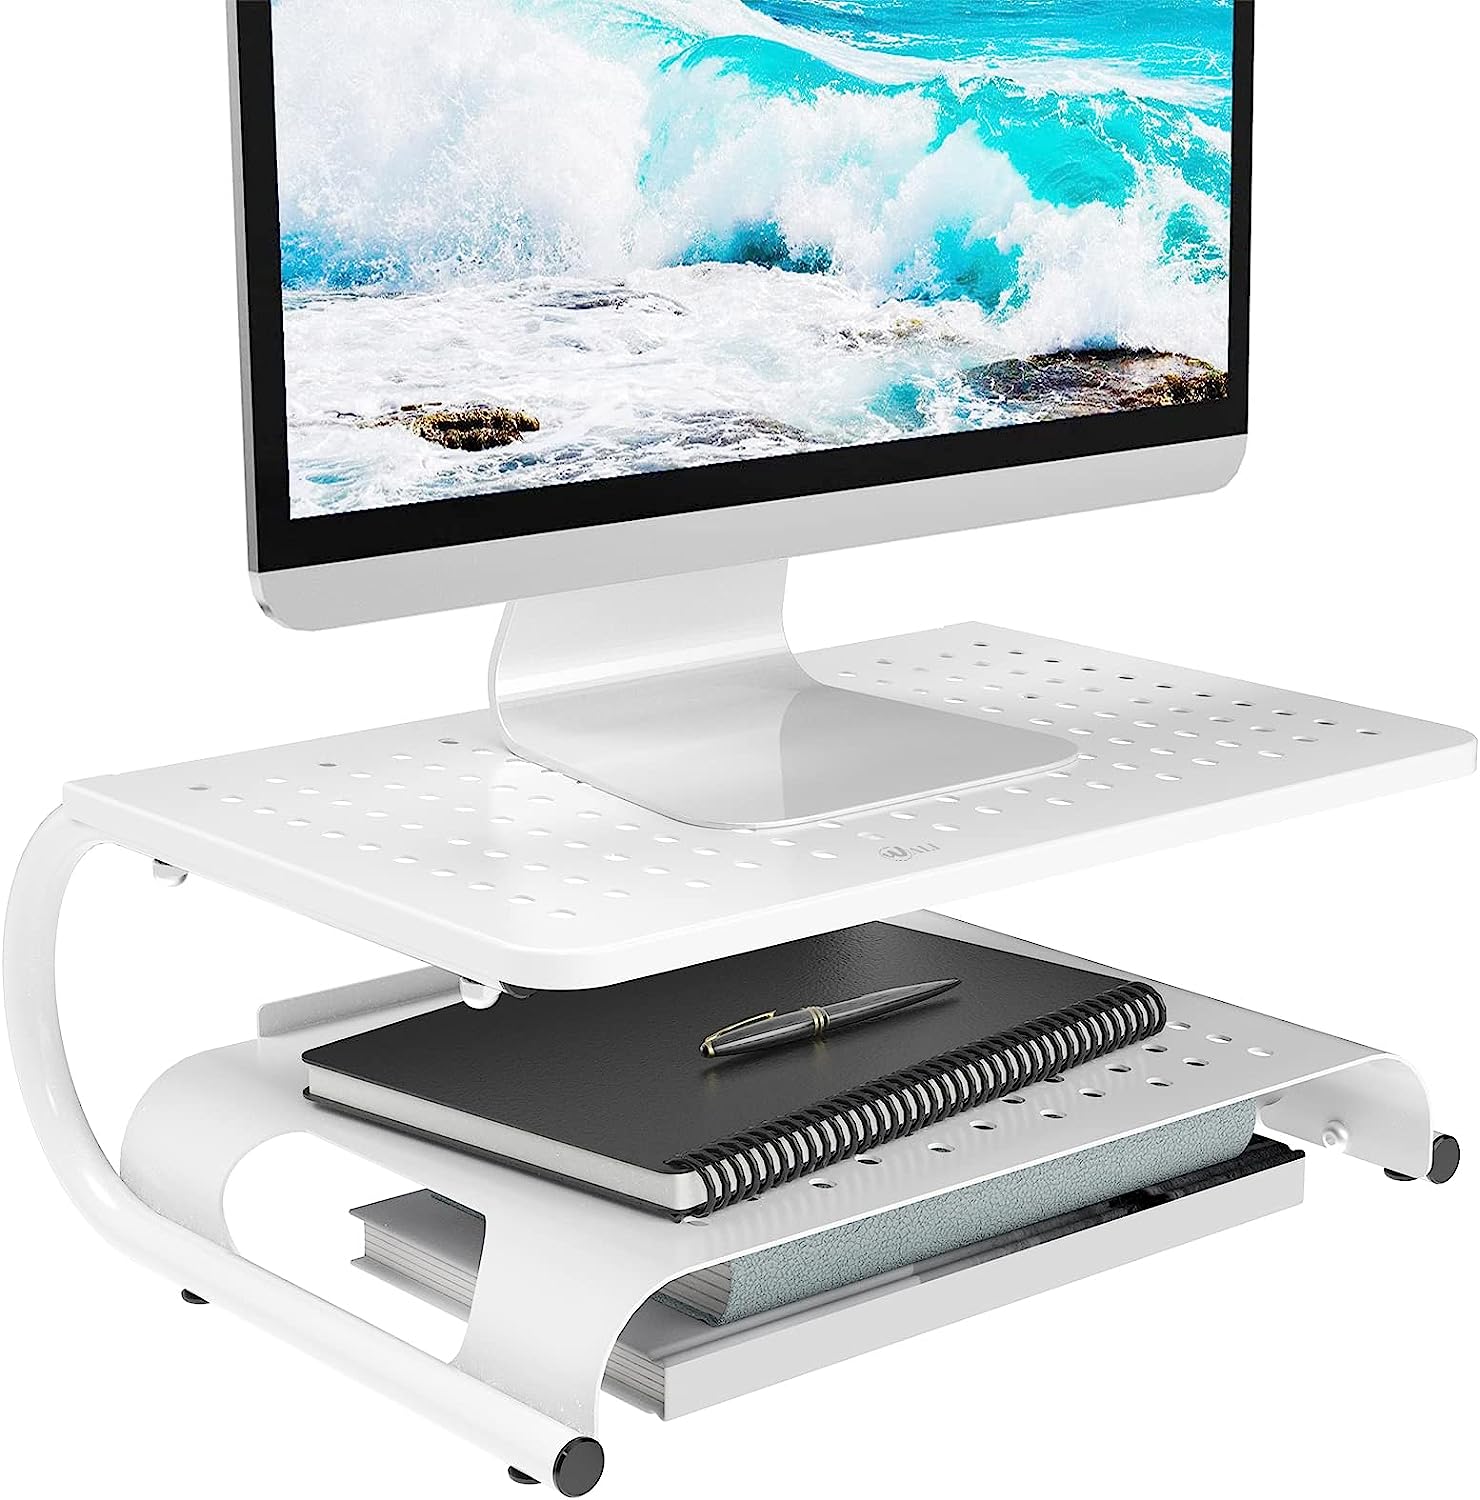 WALI Monitor Stand Riser, Desk Organizer with 2 Tiers [...]